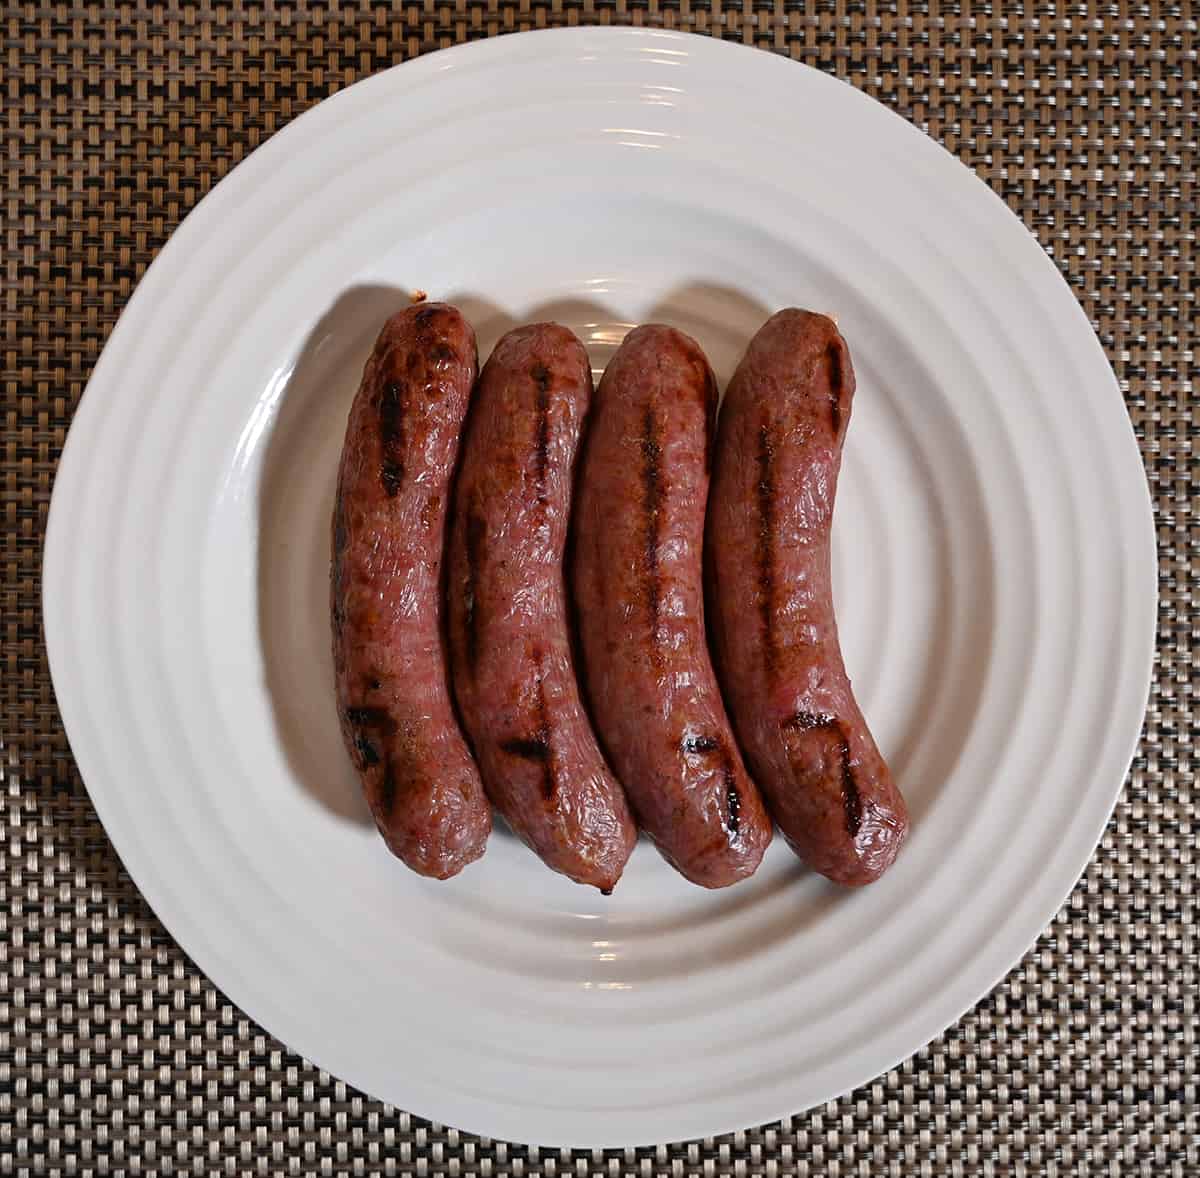 Image of four cooked bratwurst served on a white plate.